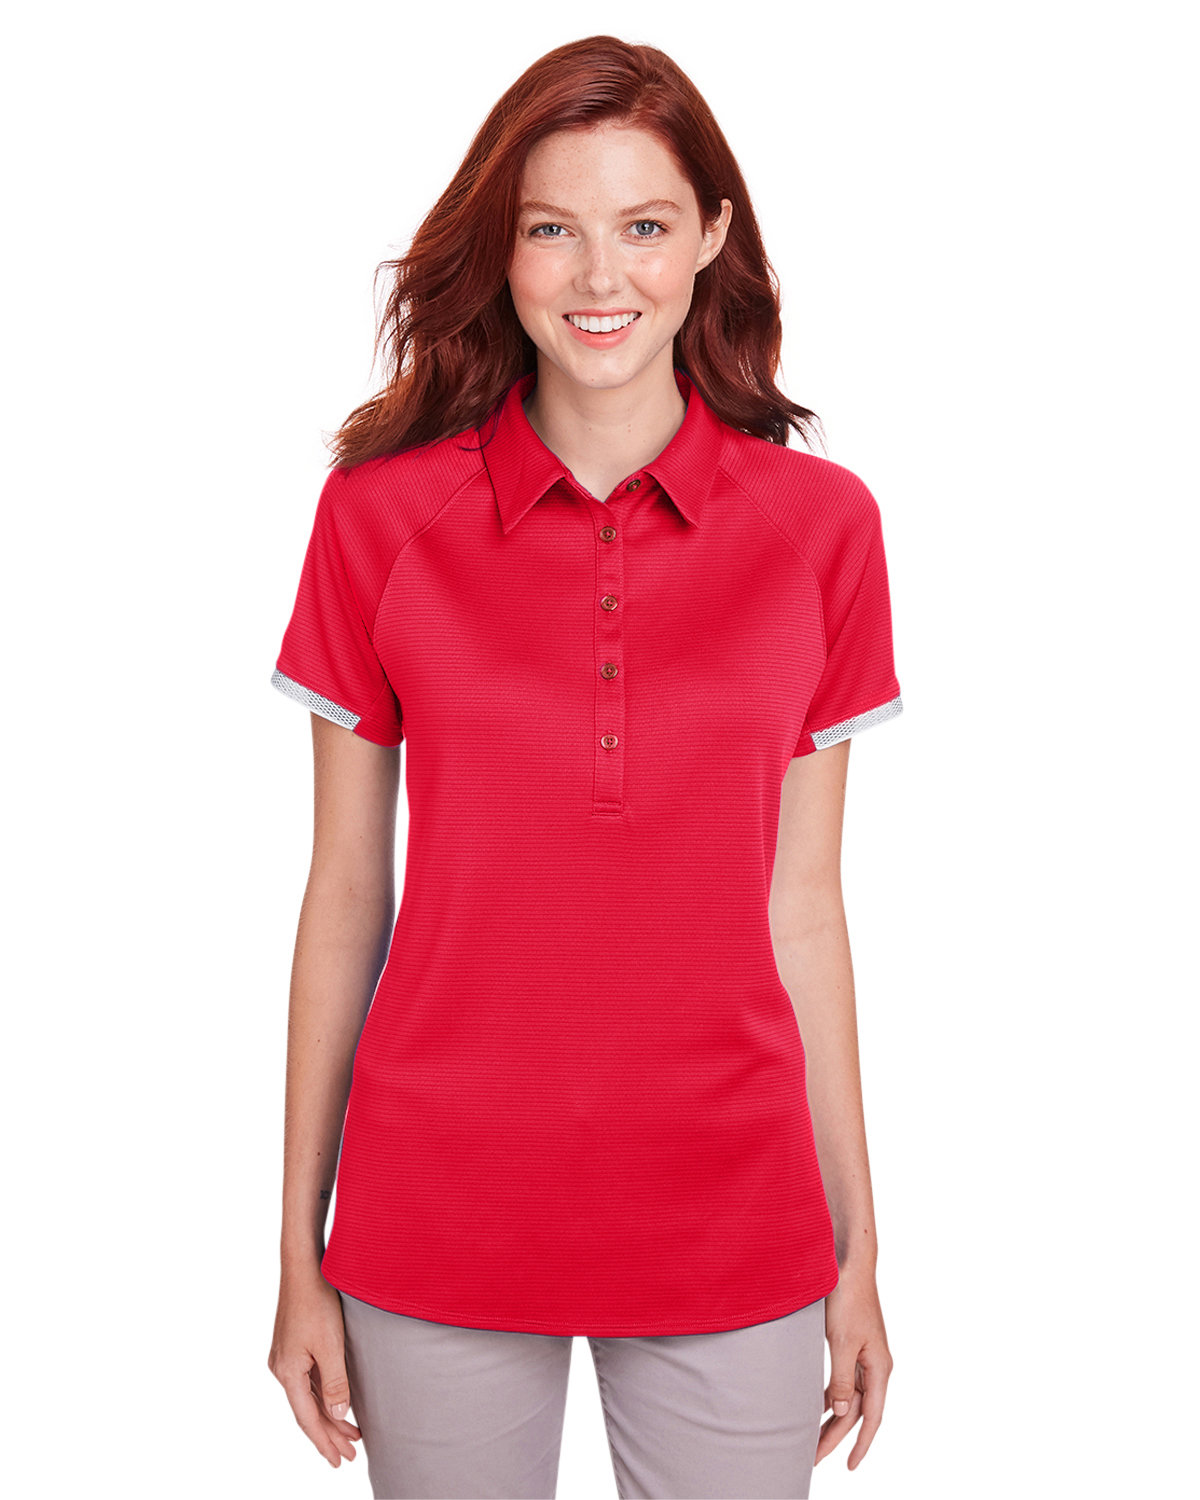 Ladies Corporate Rival Polo-Under Armour